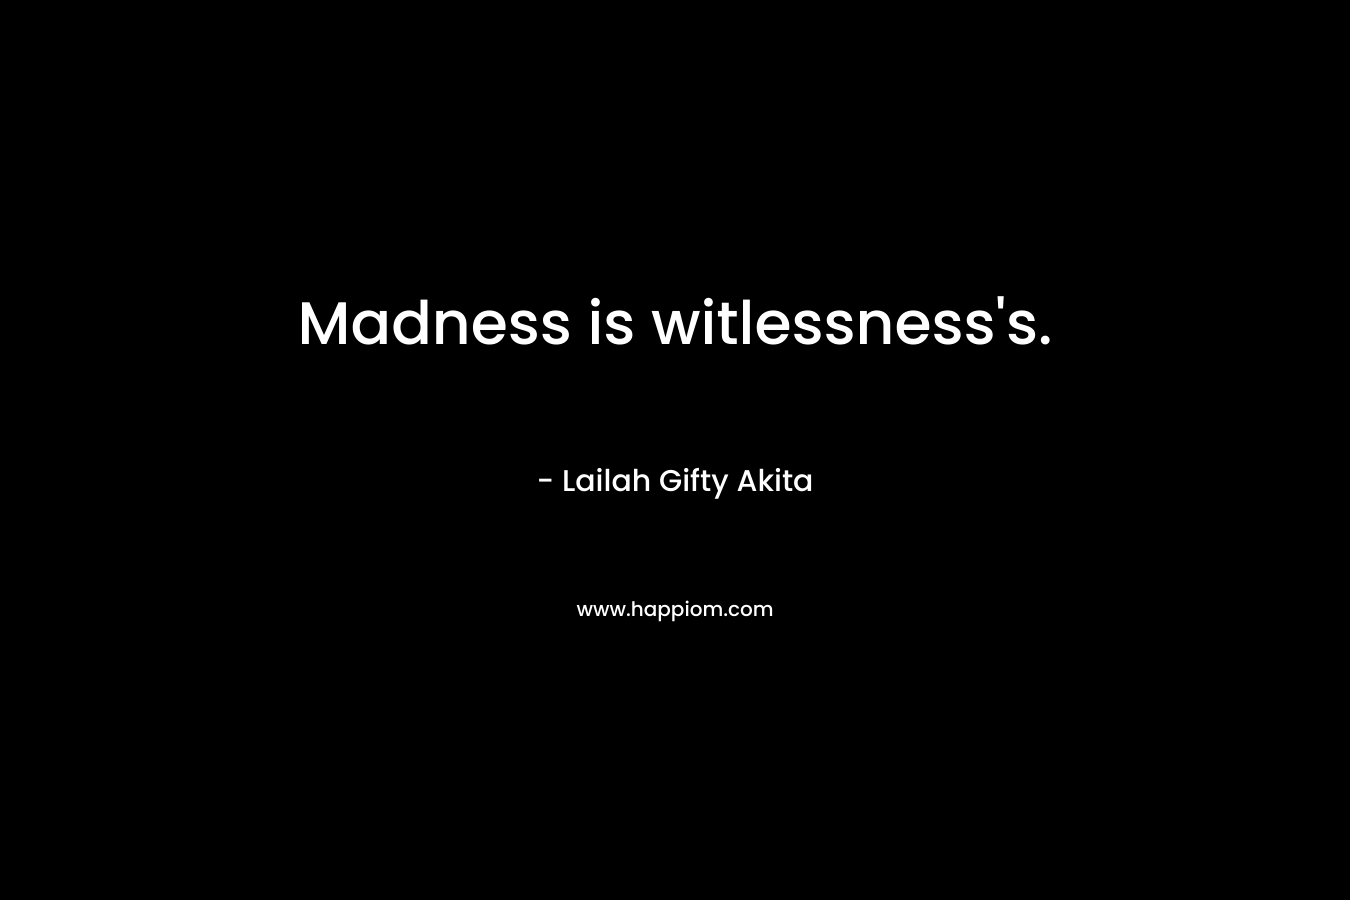 Madness is witlessness’s. – Lailah Gifty Akita